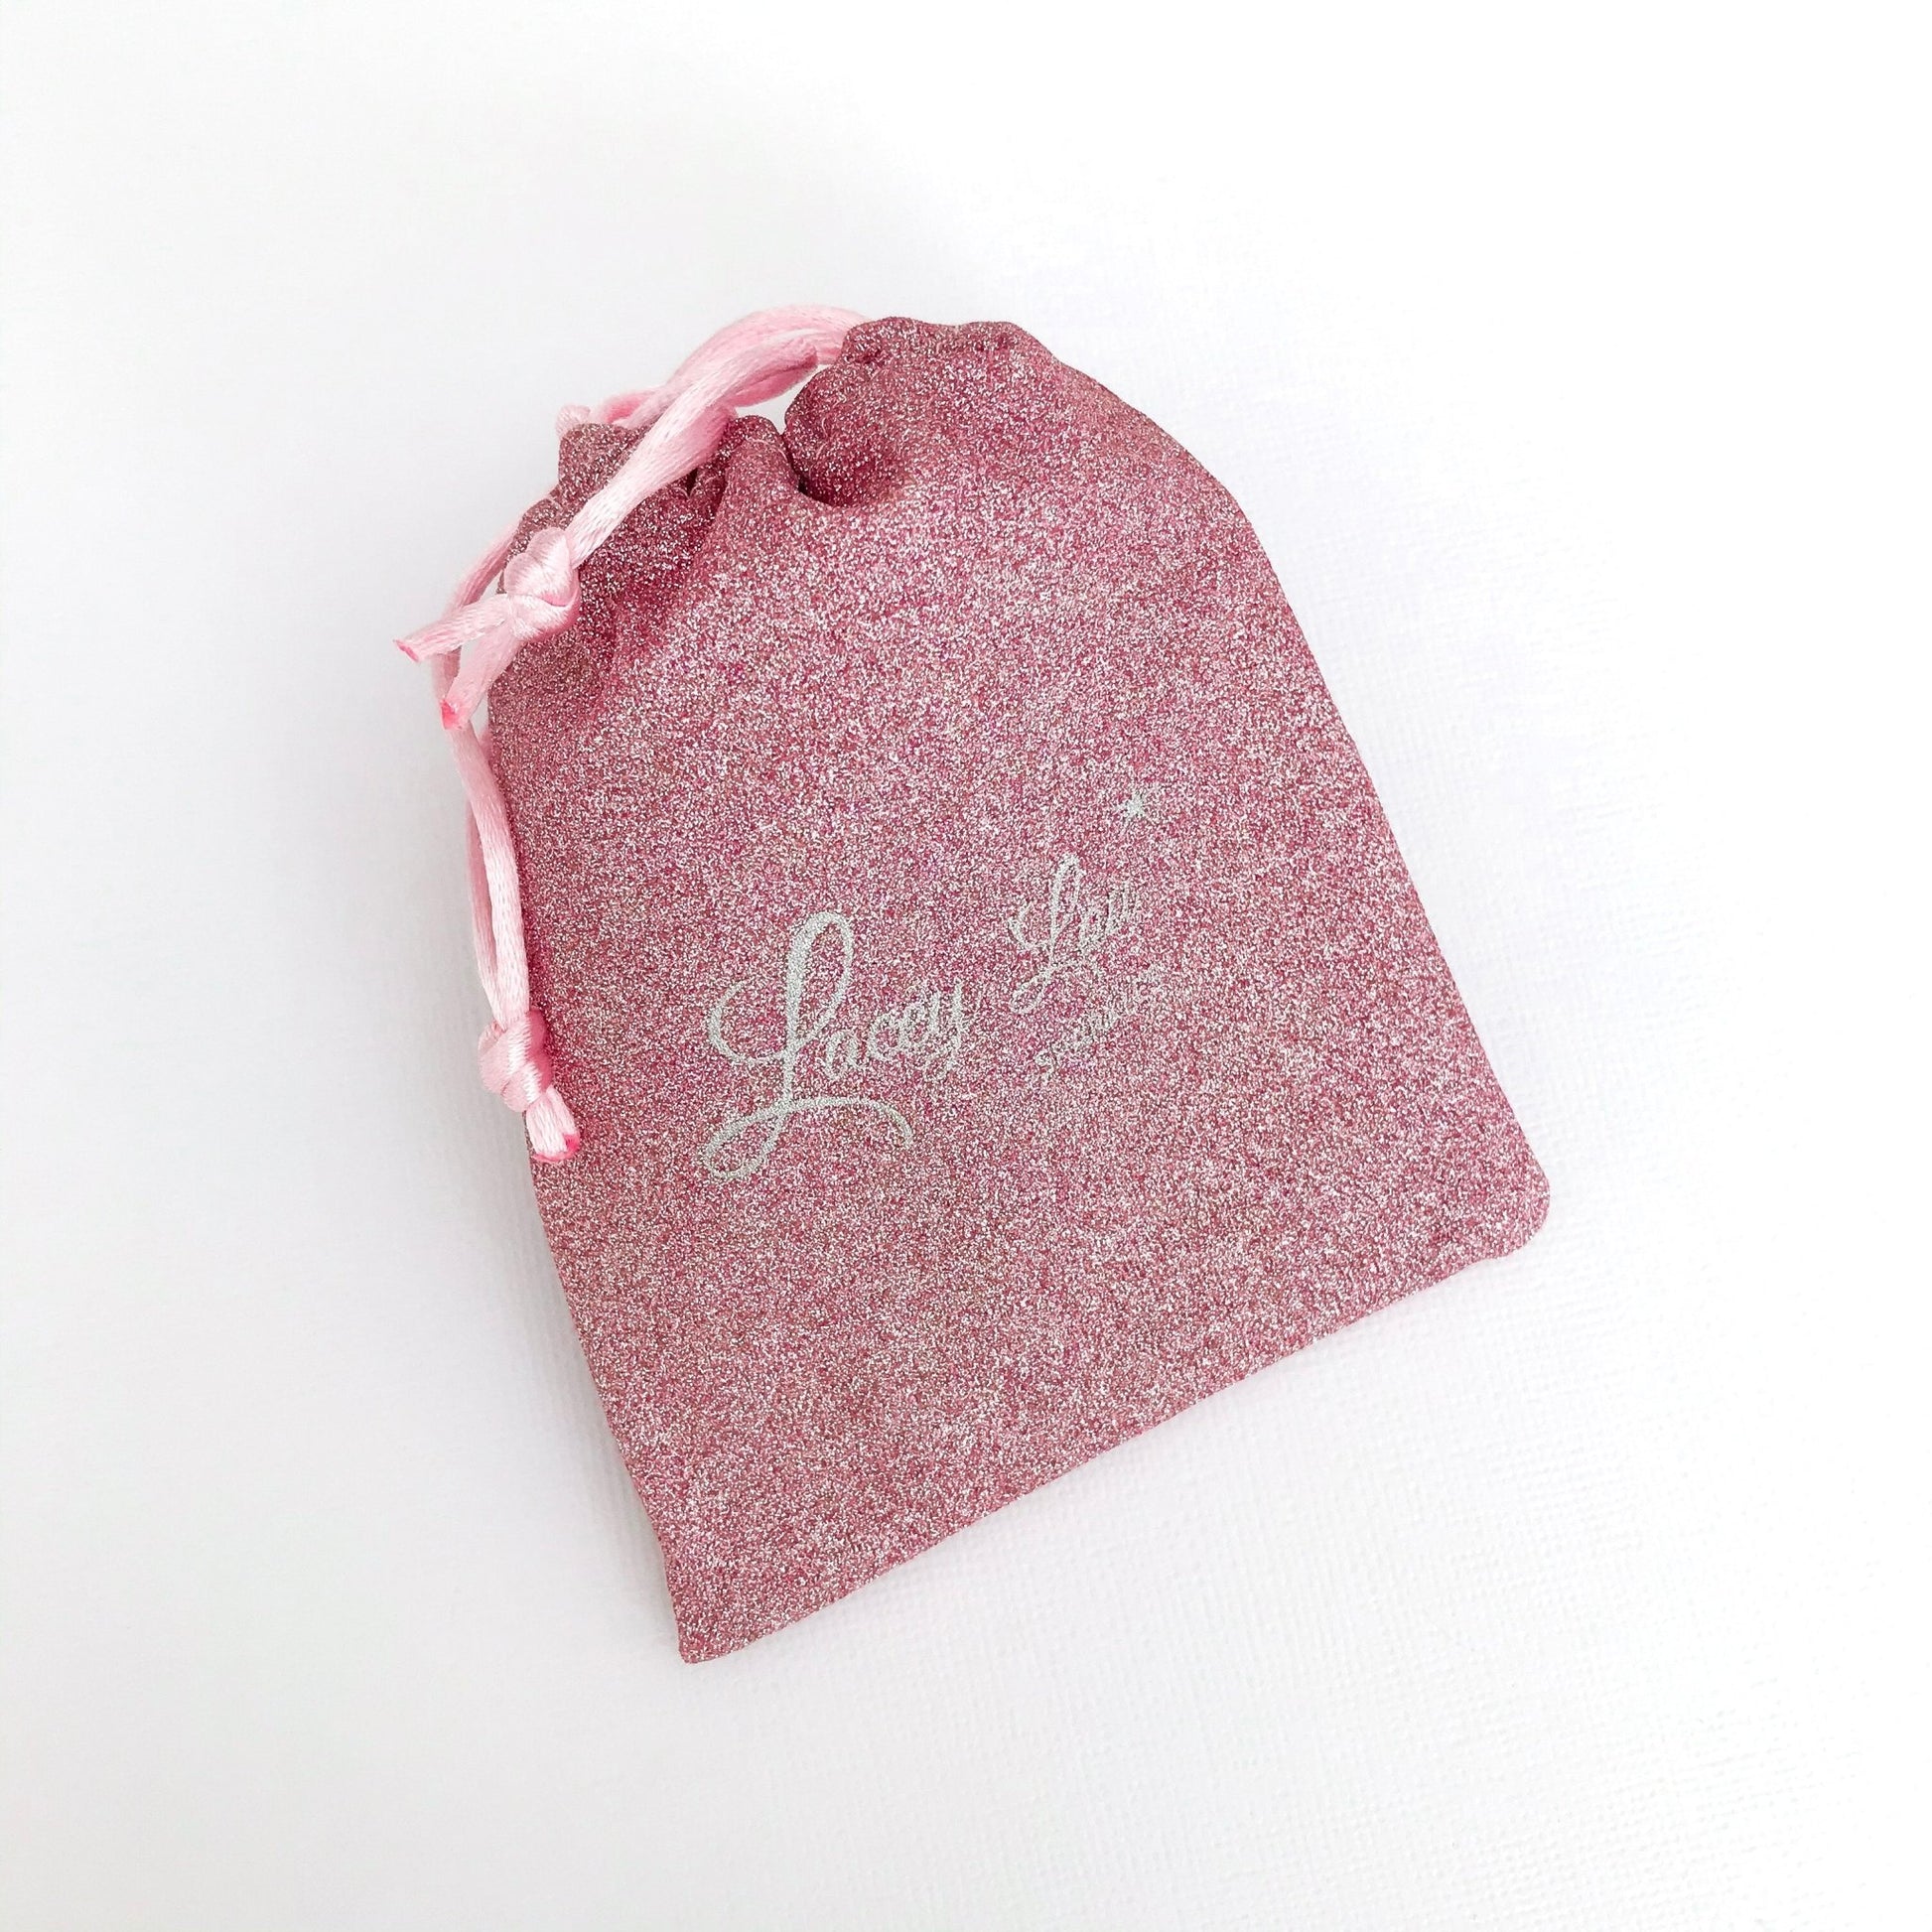 Sparkly gift pouch - Lacey Lou Sparkles